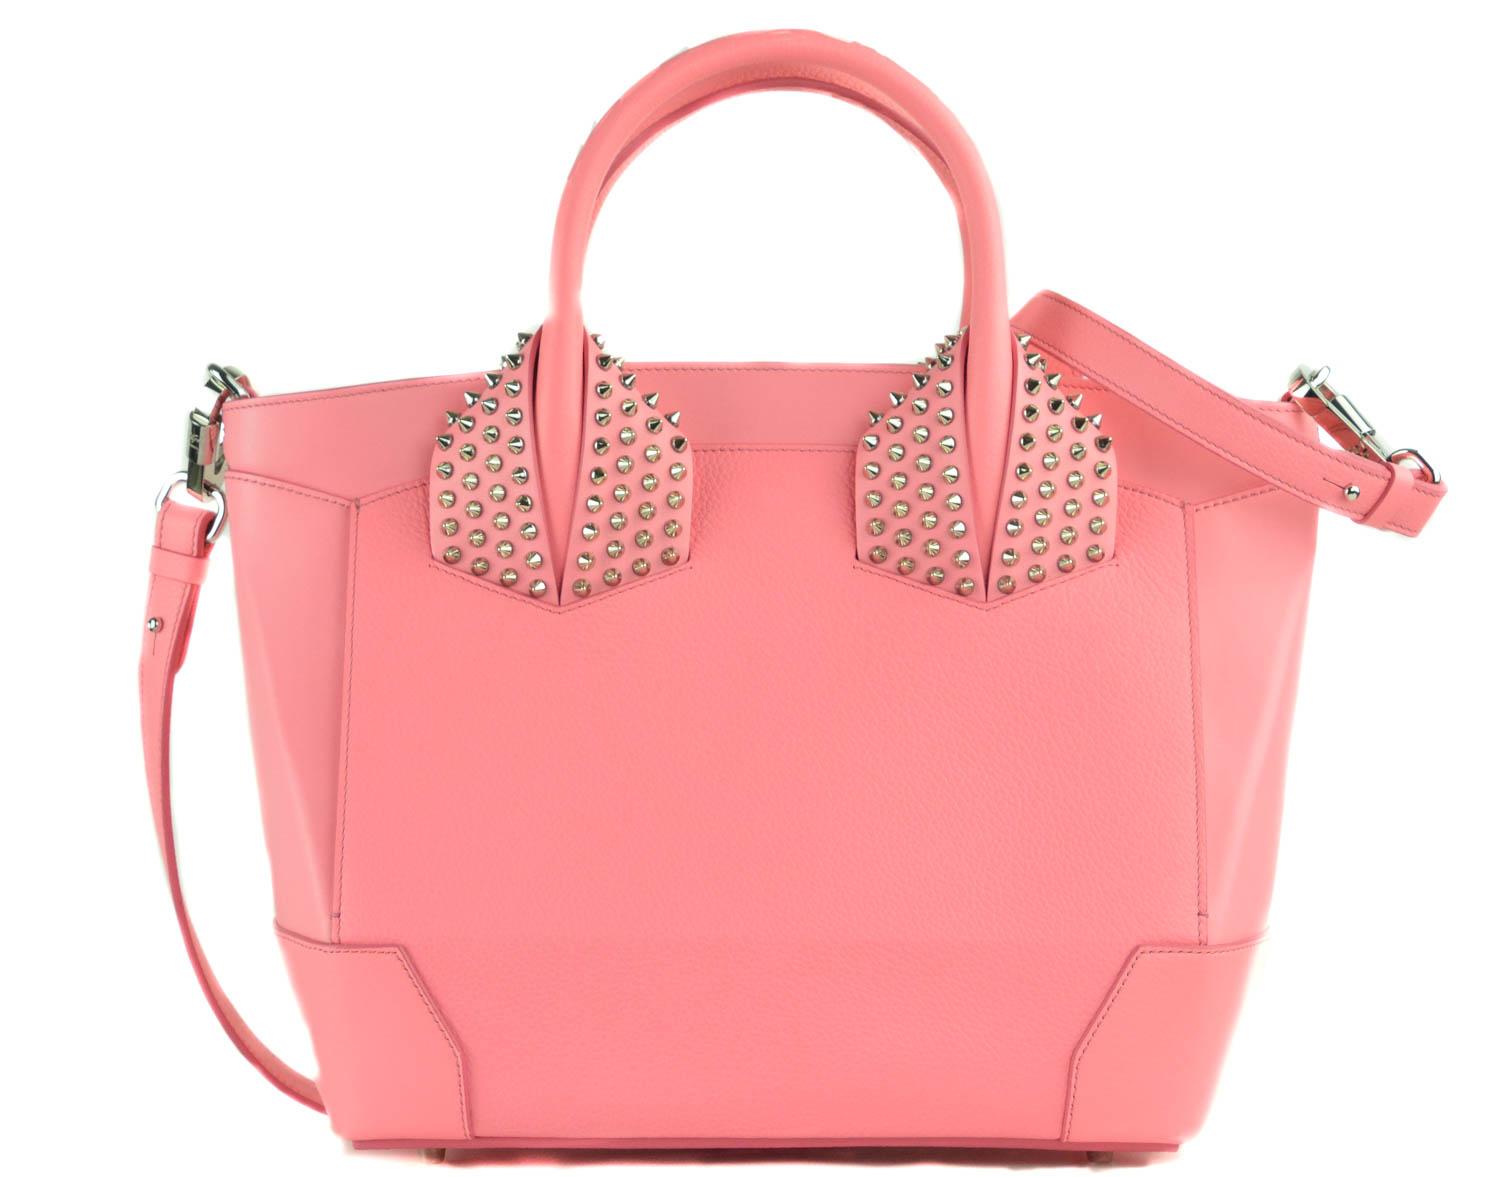 Christian Louboutin Women's Eloise Pink Large Tote In New Condition For Sale In Brooklyn, NY